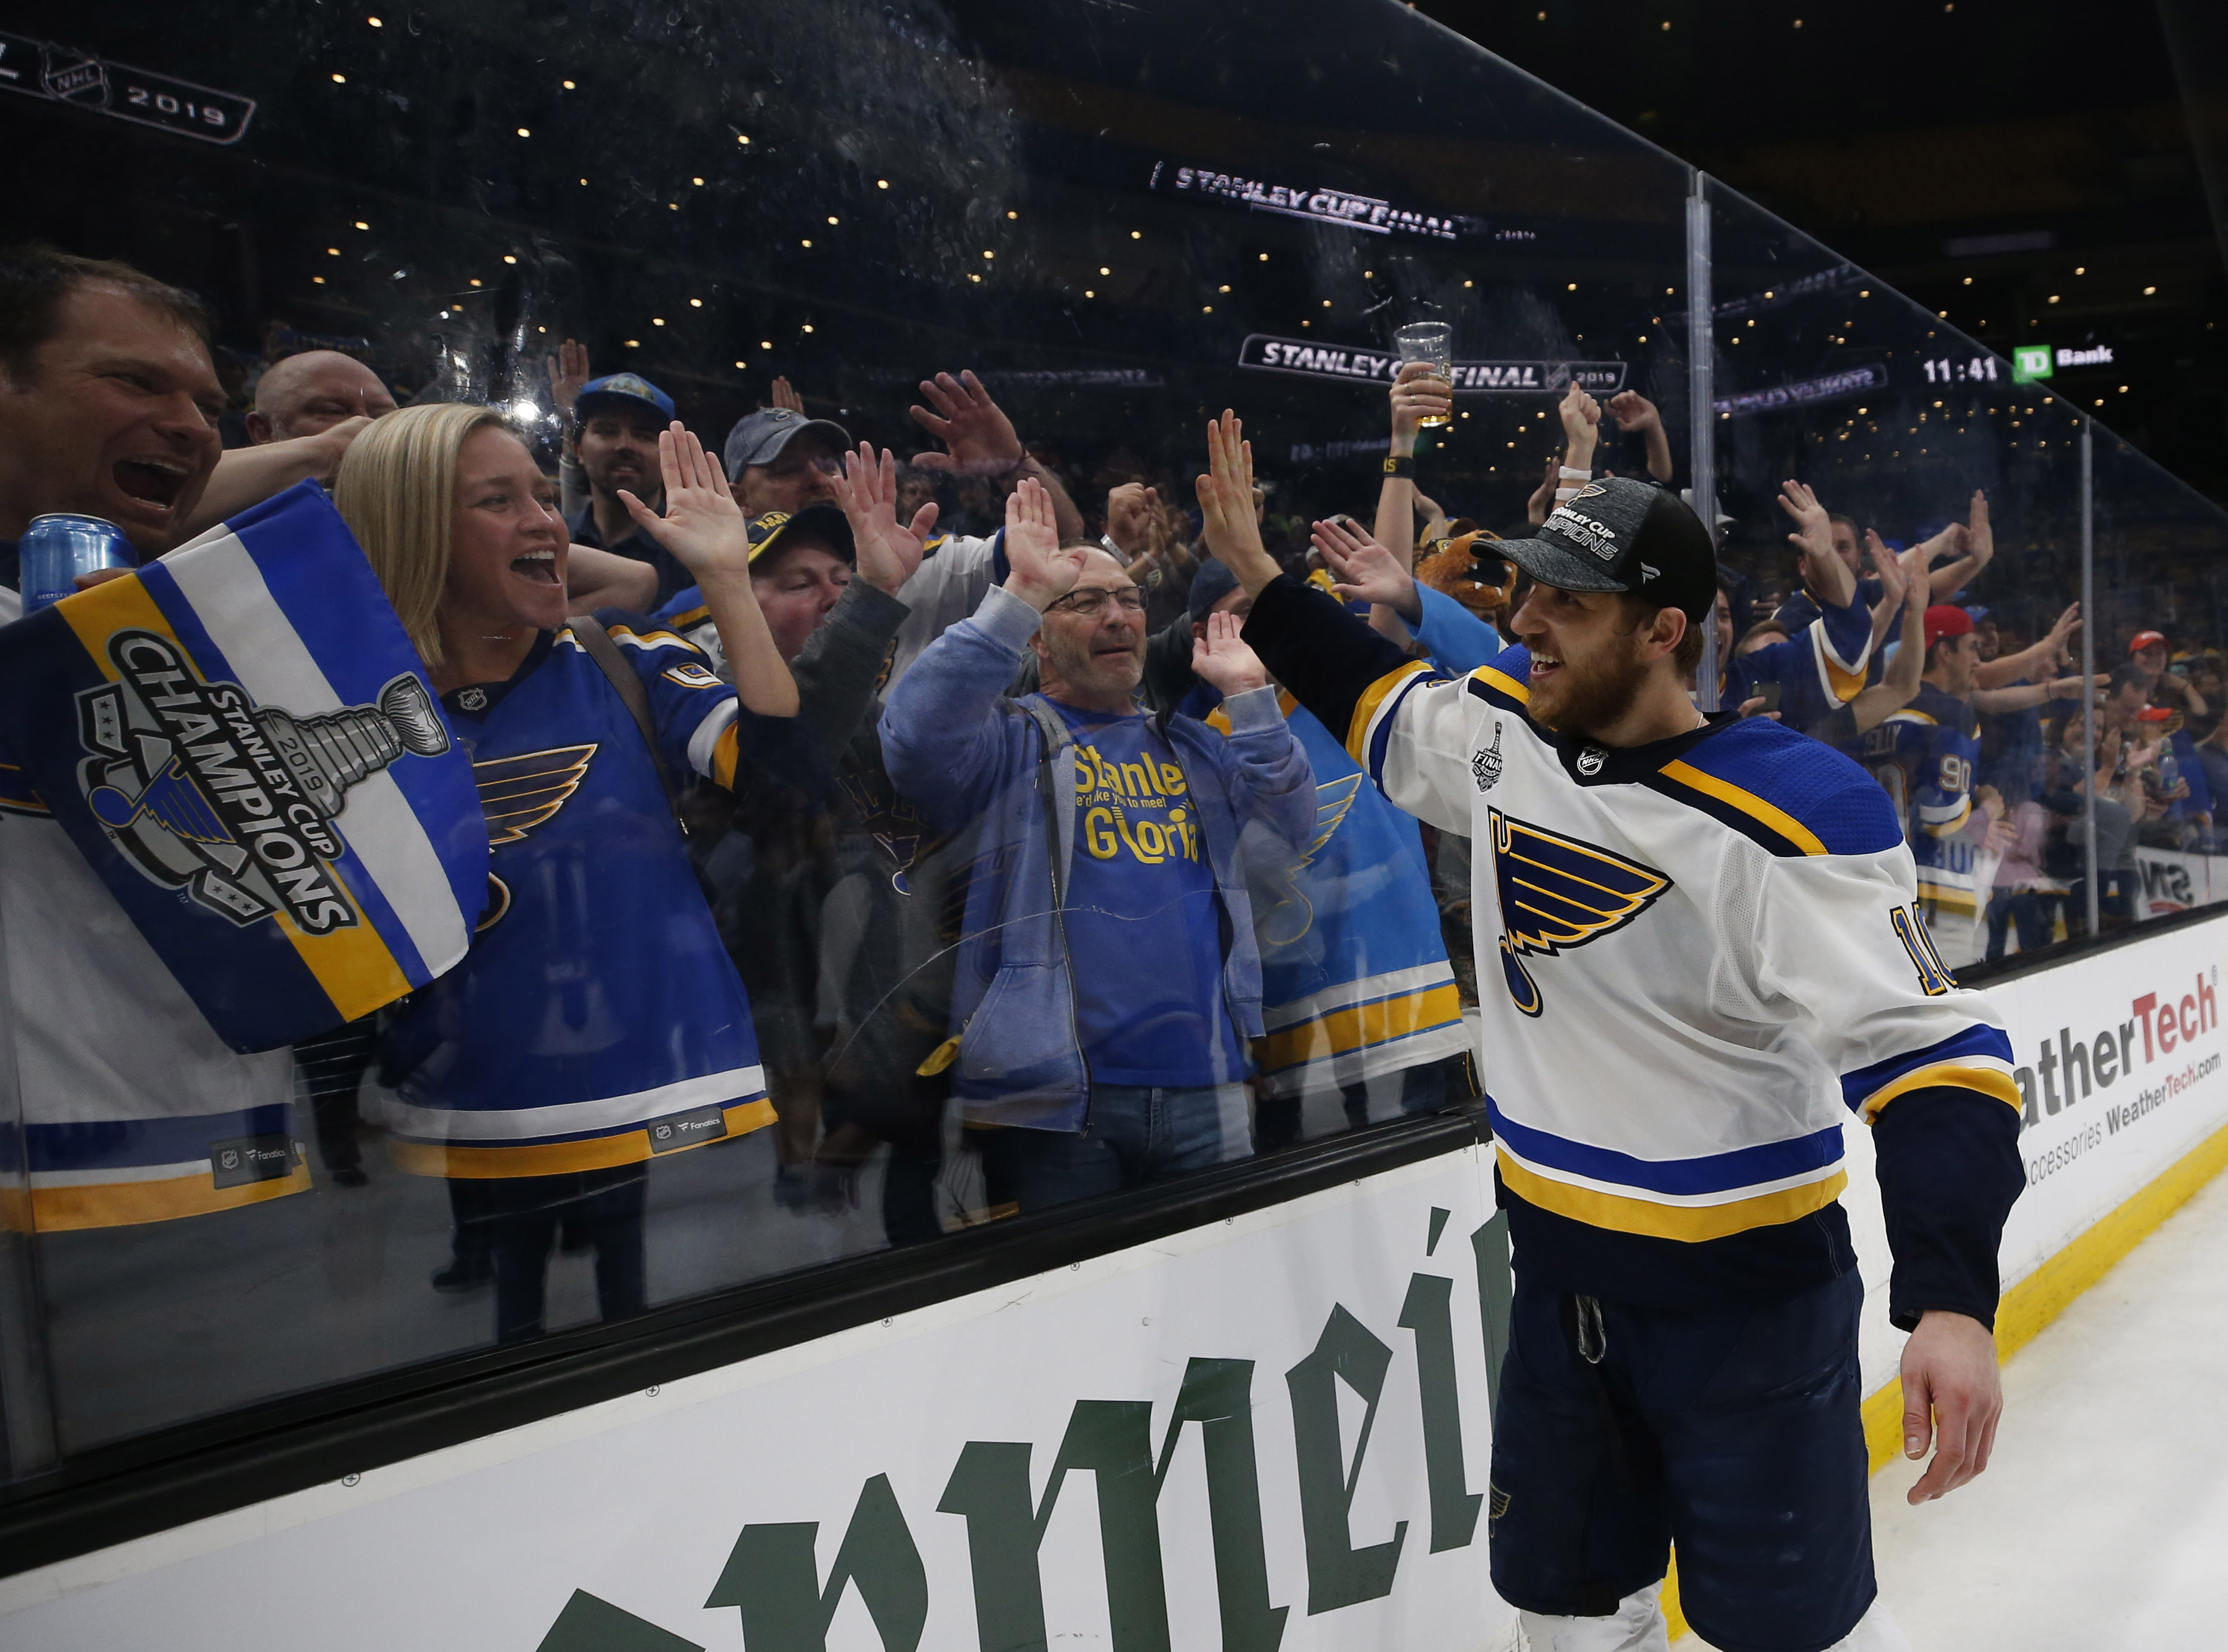 What can you bring to a St. Louis Blues game?